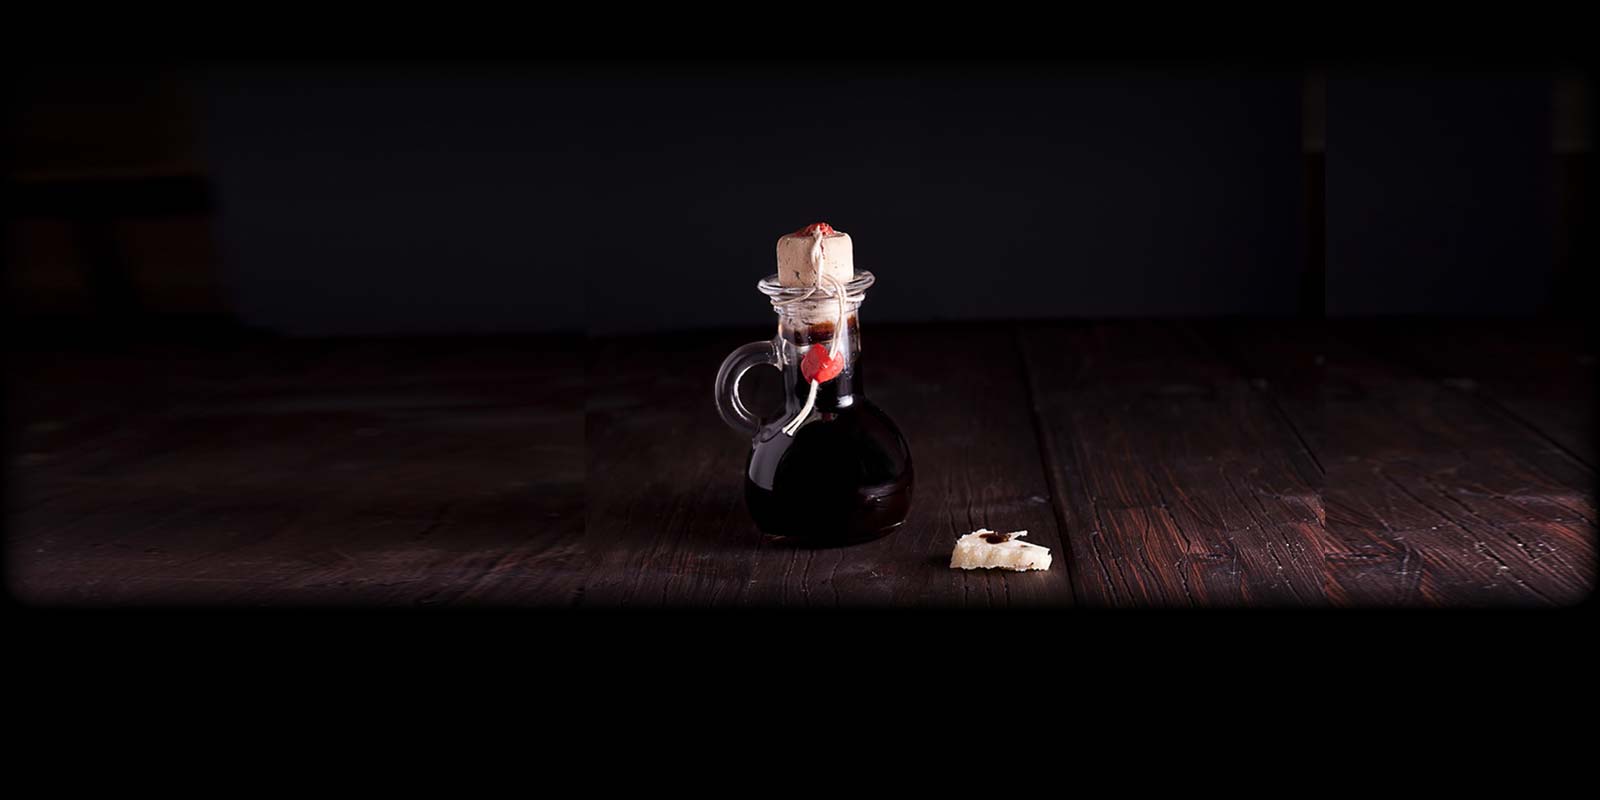 Aceto Balsamico Traditionale This vinegar is a pure natural product, free of preservatives, and dyes. only about 10,000 liters are produced each year, making it the most rare and precious vinegars worldwide.